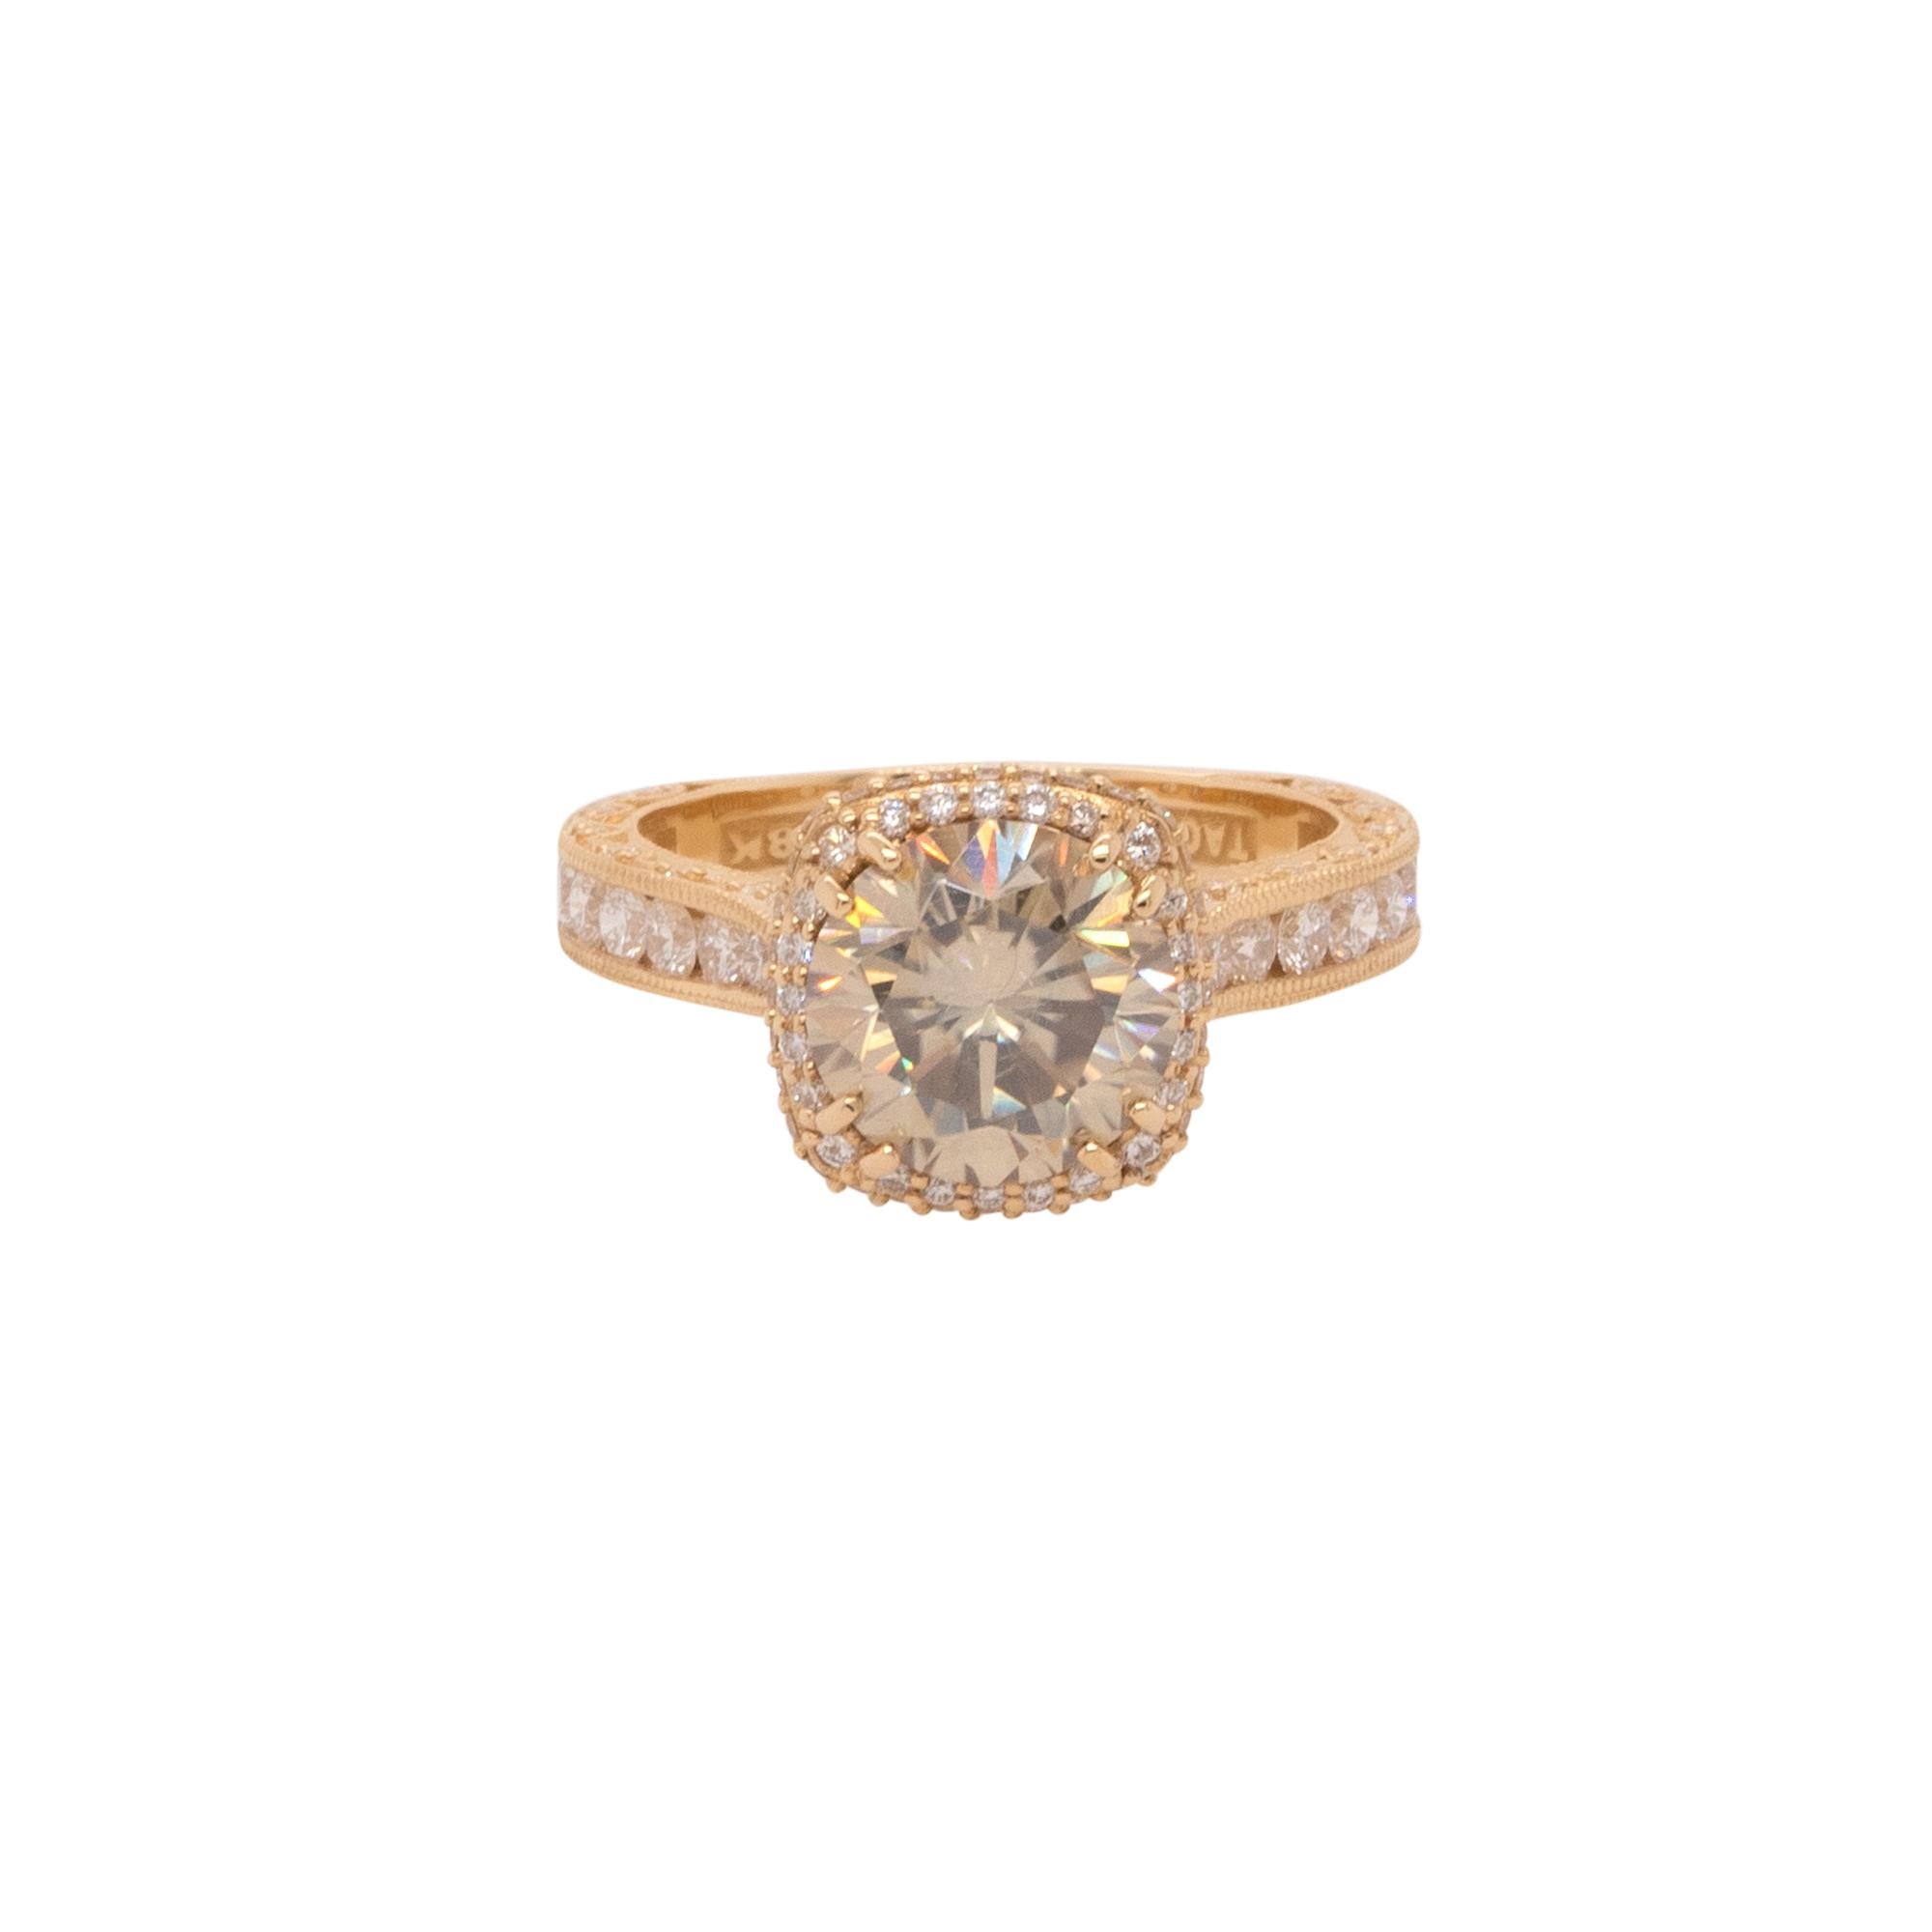 Center Details: 2.36ct Natural Round Brilliant Diamond that is Fancy Yellow in color and SI3 in clarity. Laser drilled.

Ring Material: 18k Yellow gold

Ring Details: Tacori mounting that has 1.28ctw of round cut Diamonds. Diamonds are G/H in color